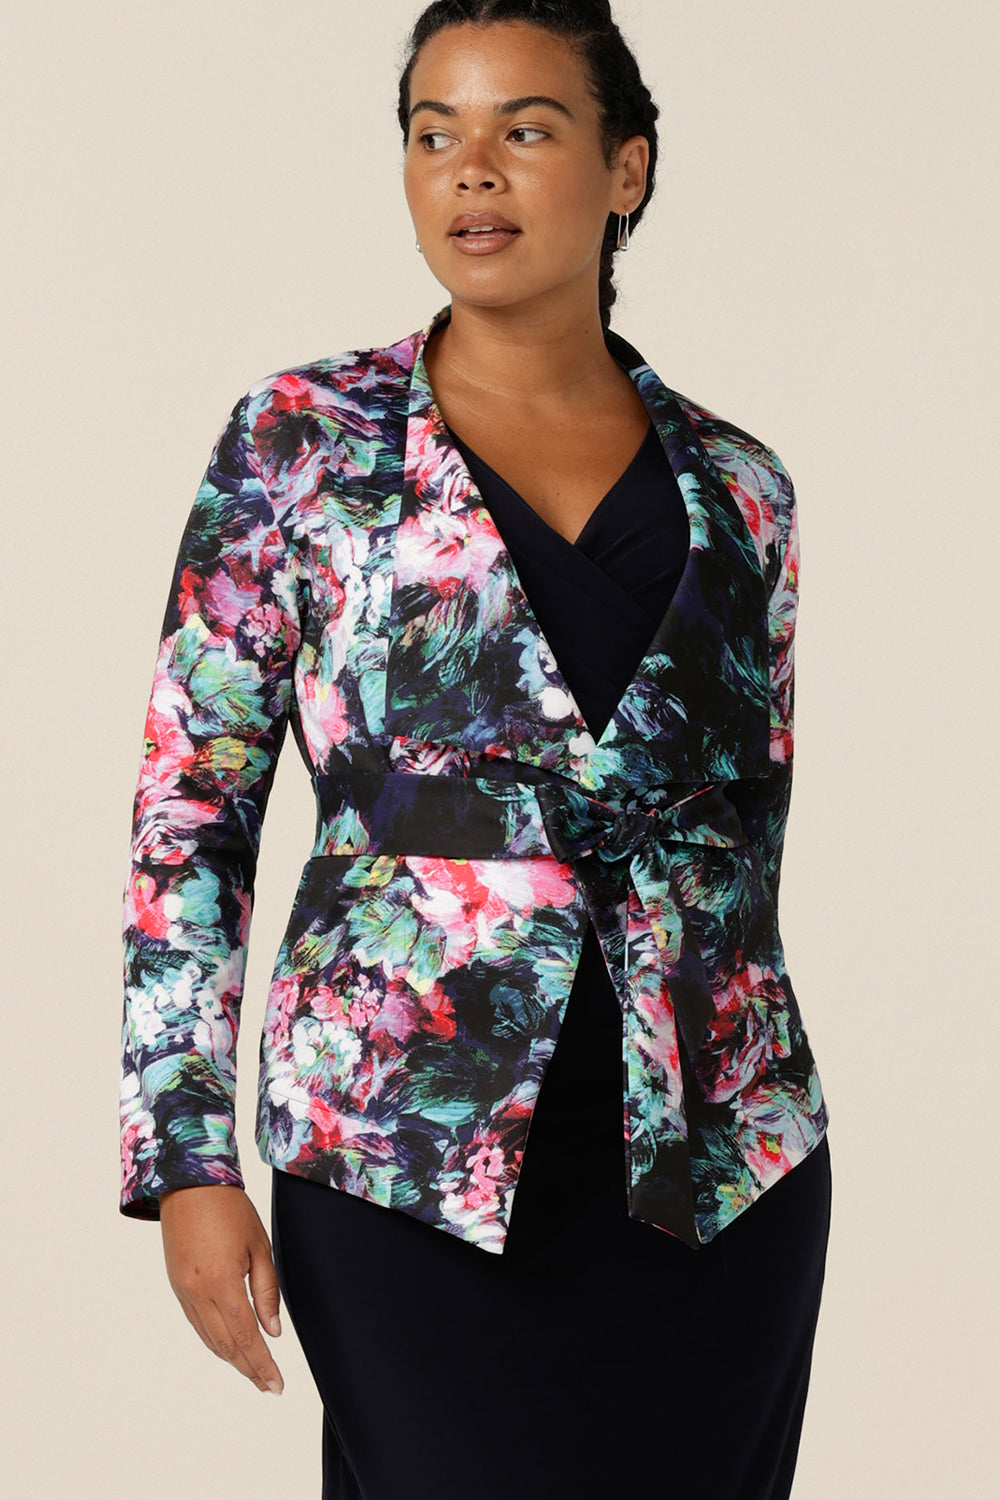 A size 12, curvy woman wears a wrap around jacket in comfortable stretch jersey. Patterned in an abstract floral print on a black base, this jacket has a V-neck, long sleeves and a belt tie. Designed as a work wear jacket and made in Australia, for the women of Australia and New Zealand, shop quality corporate jackets in sizes 8 to size 24 at Leina and Fleur.